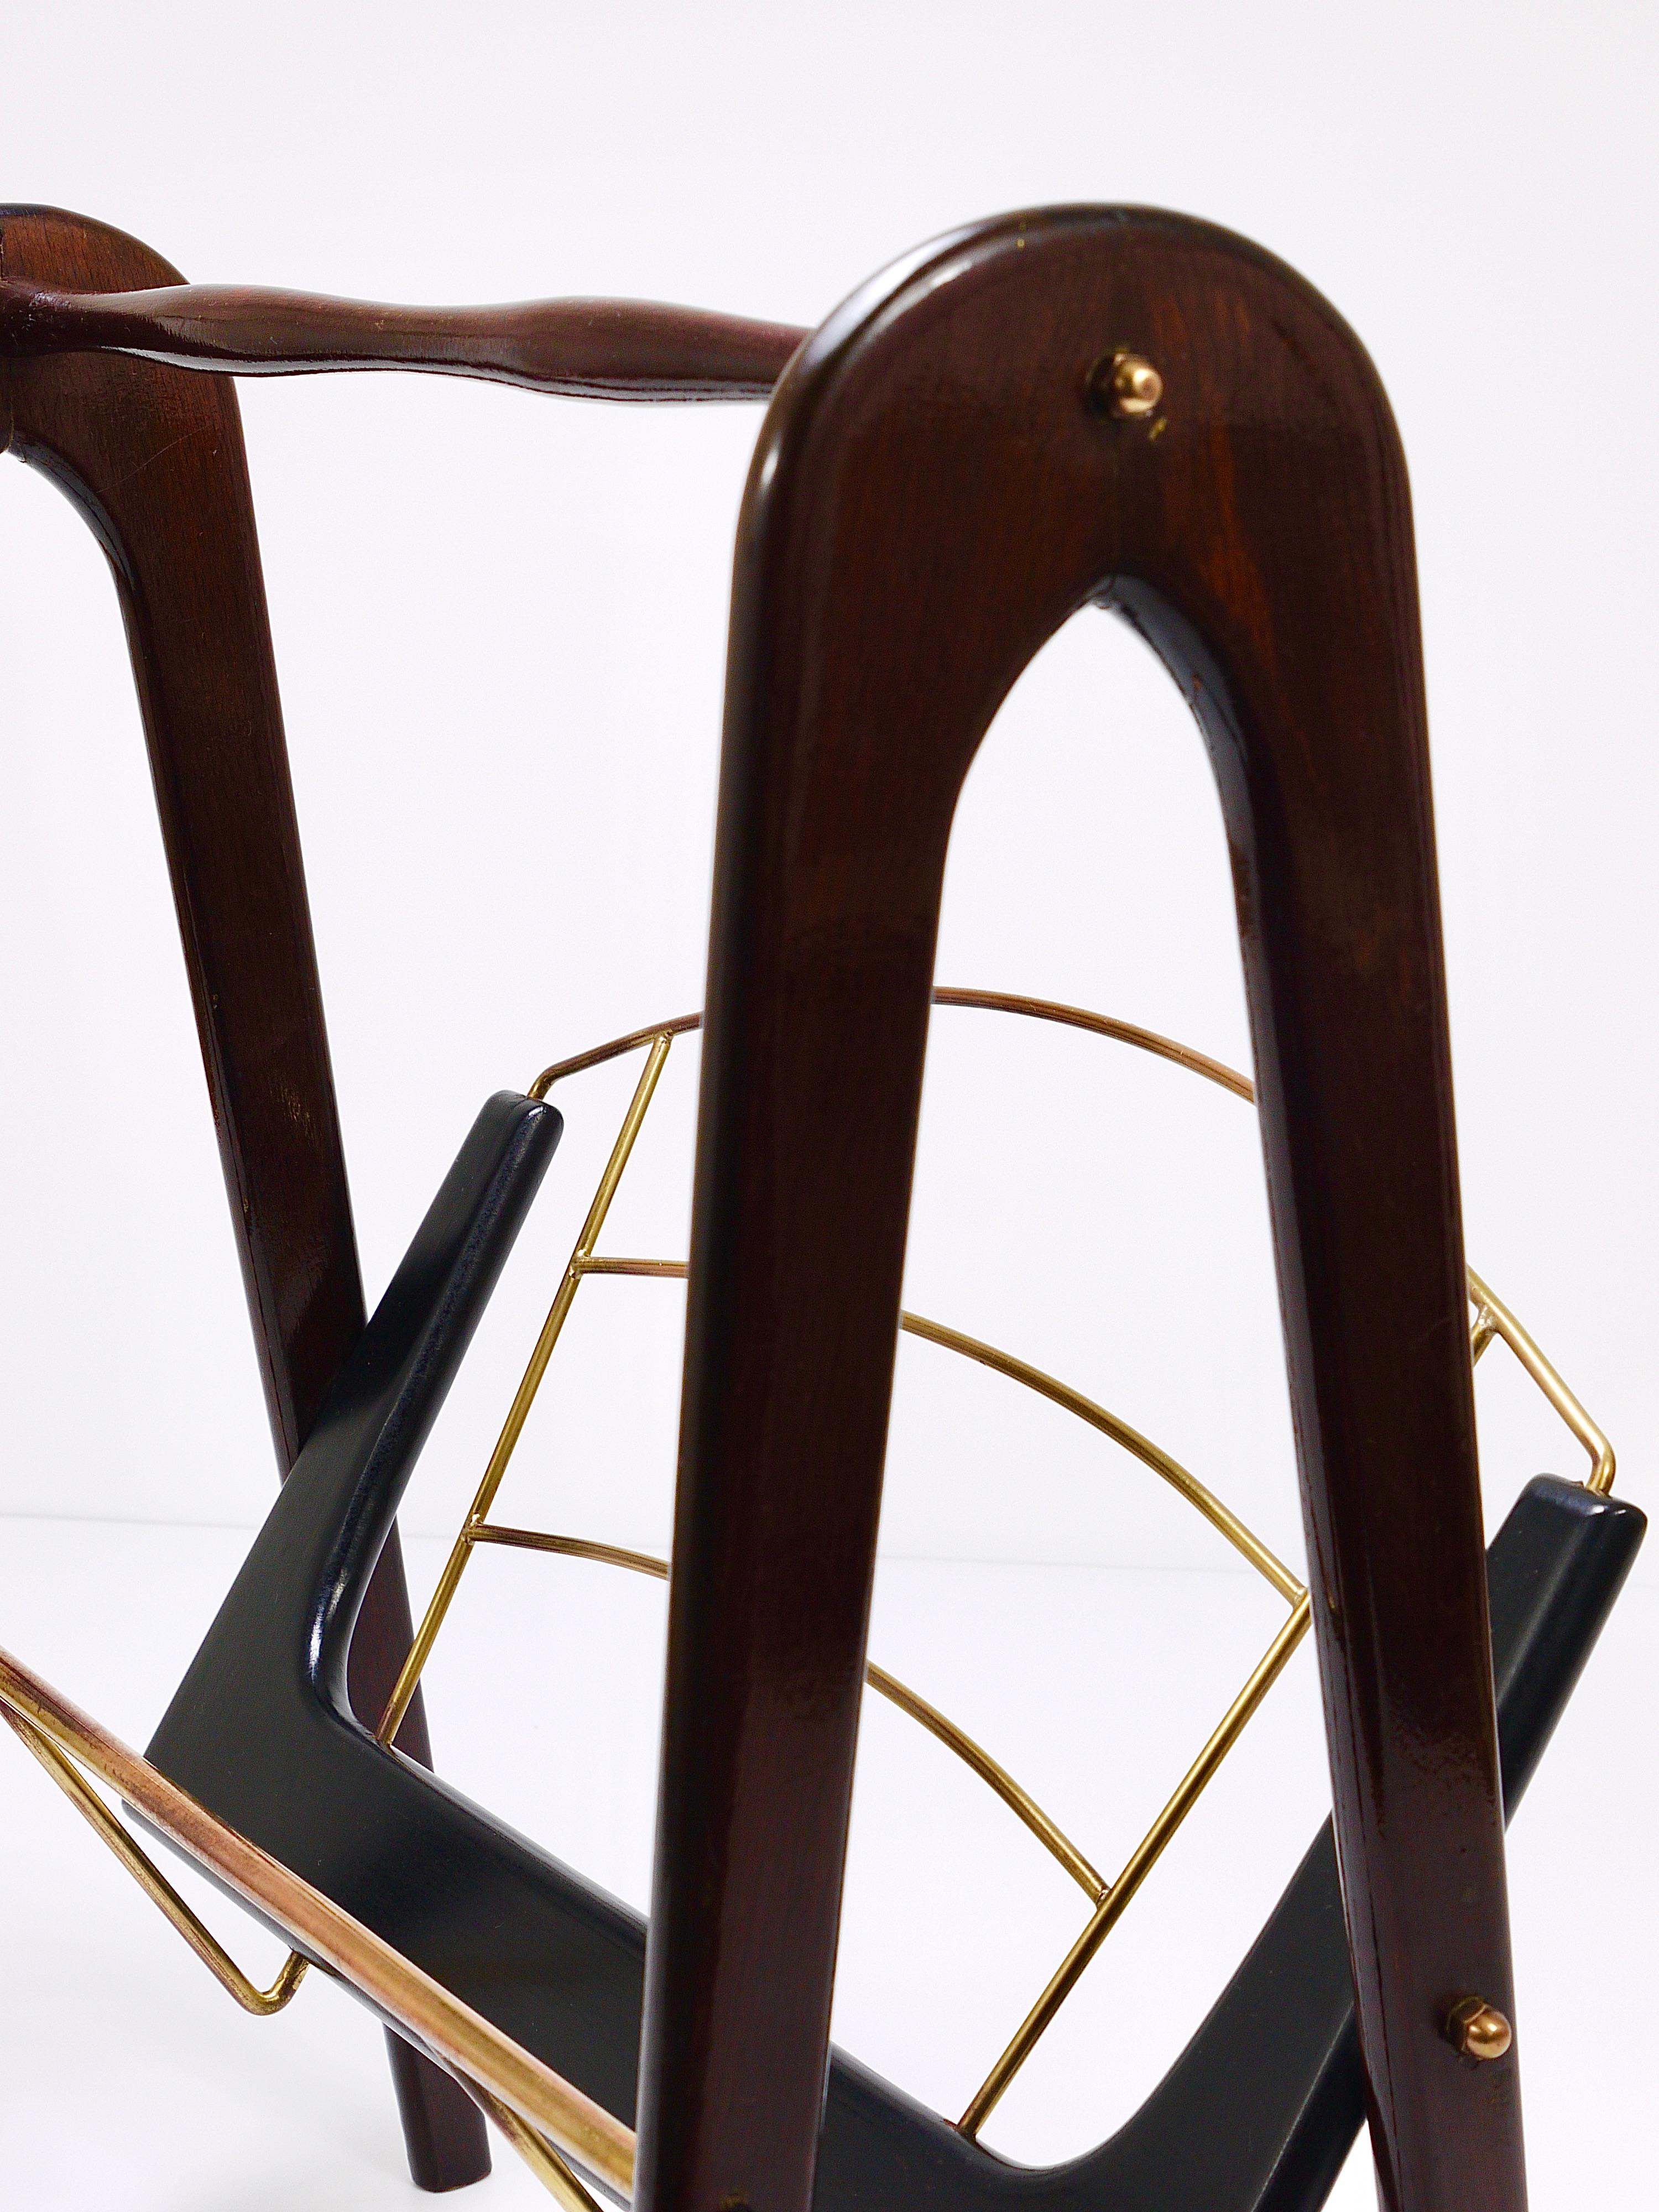 Cesare Lacca Midcentury Magazine Rack, Mahogany & Brass, Italy, 1950s For Sale 14